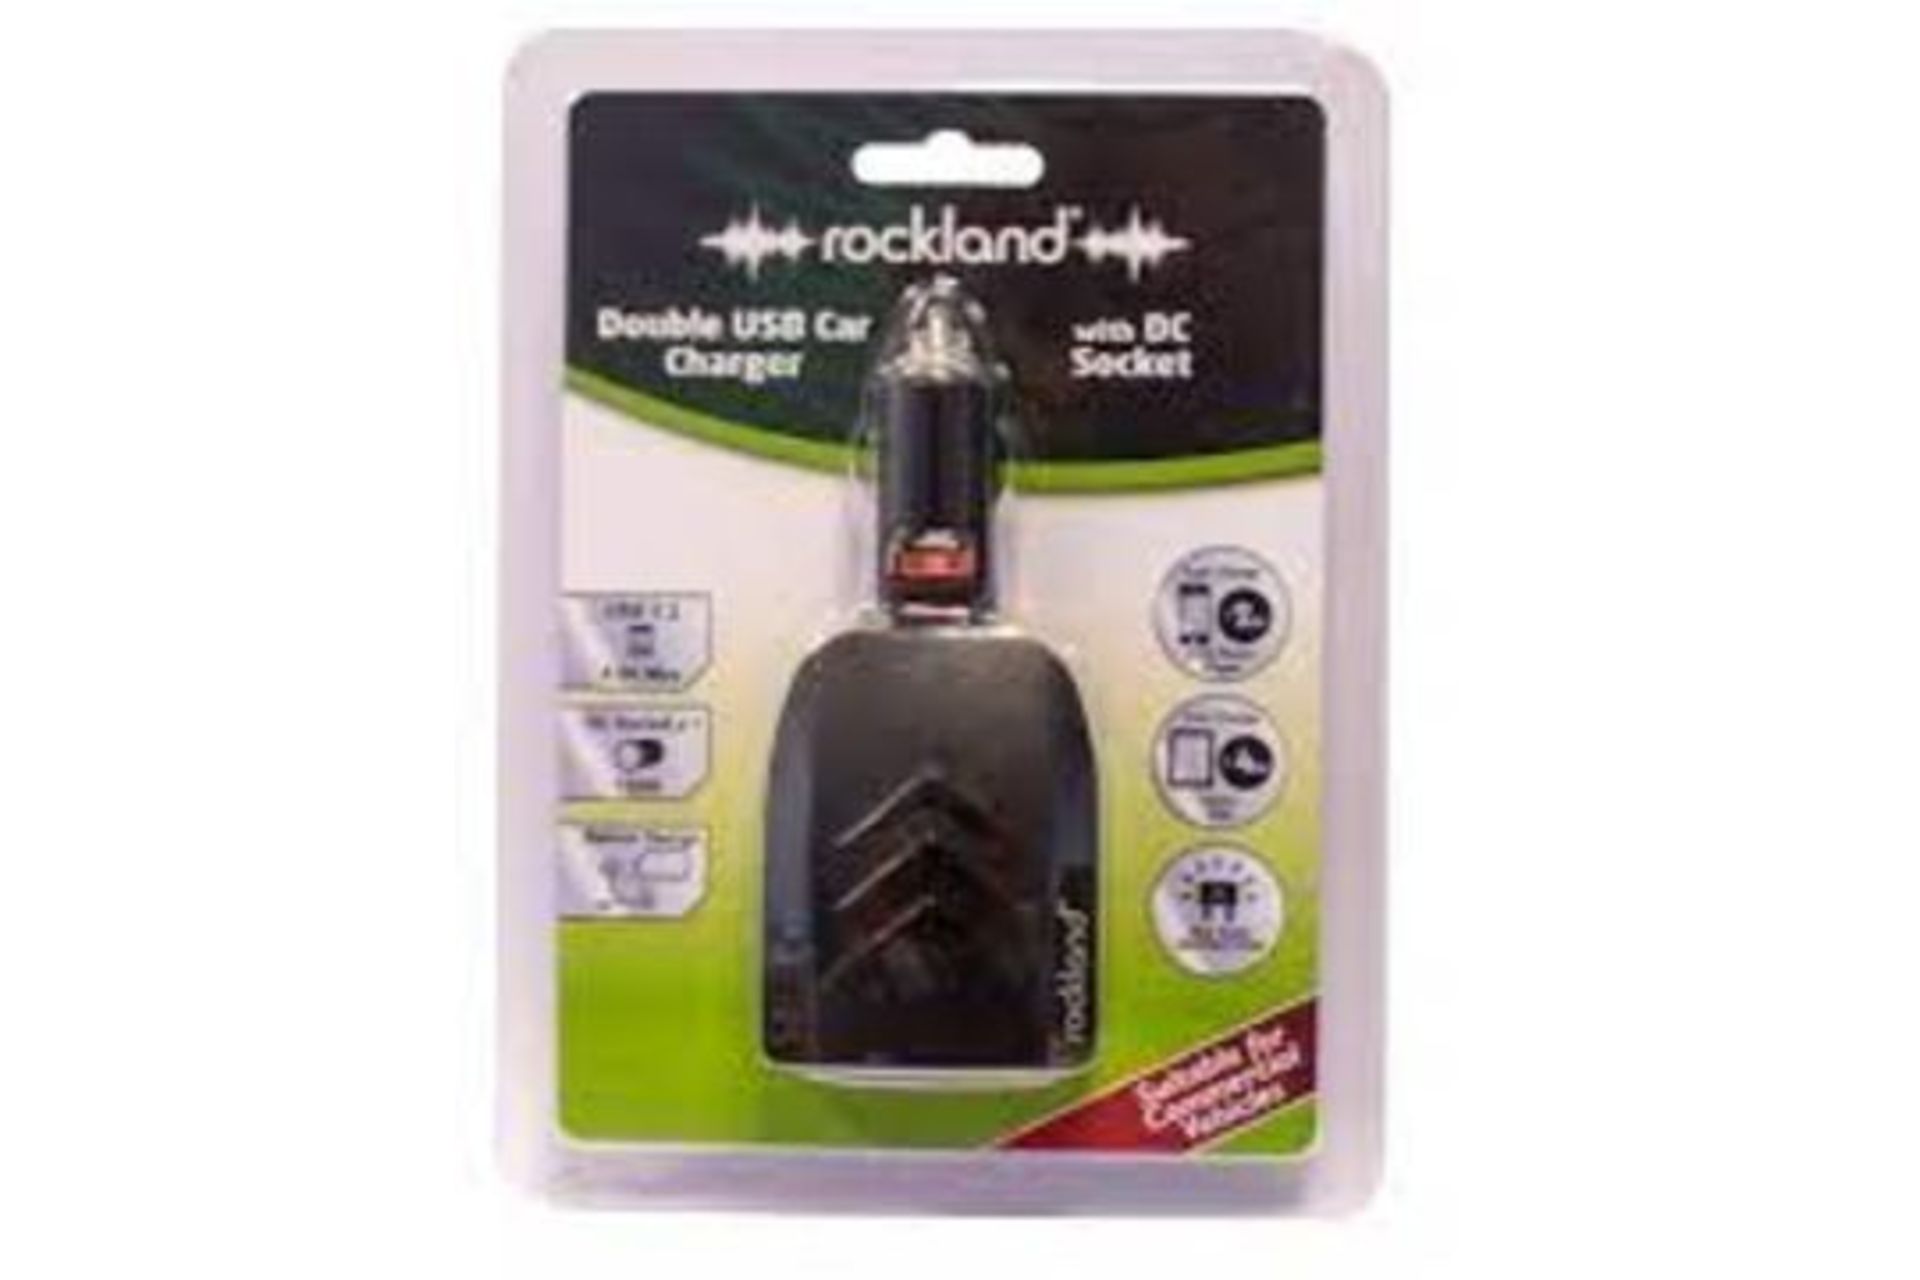 32 X NEW PACKAGED ROCKLAND DOUBLE USB CAR CHARGER WITH DC SOCKET. RRP £15 EACH. ROW 19